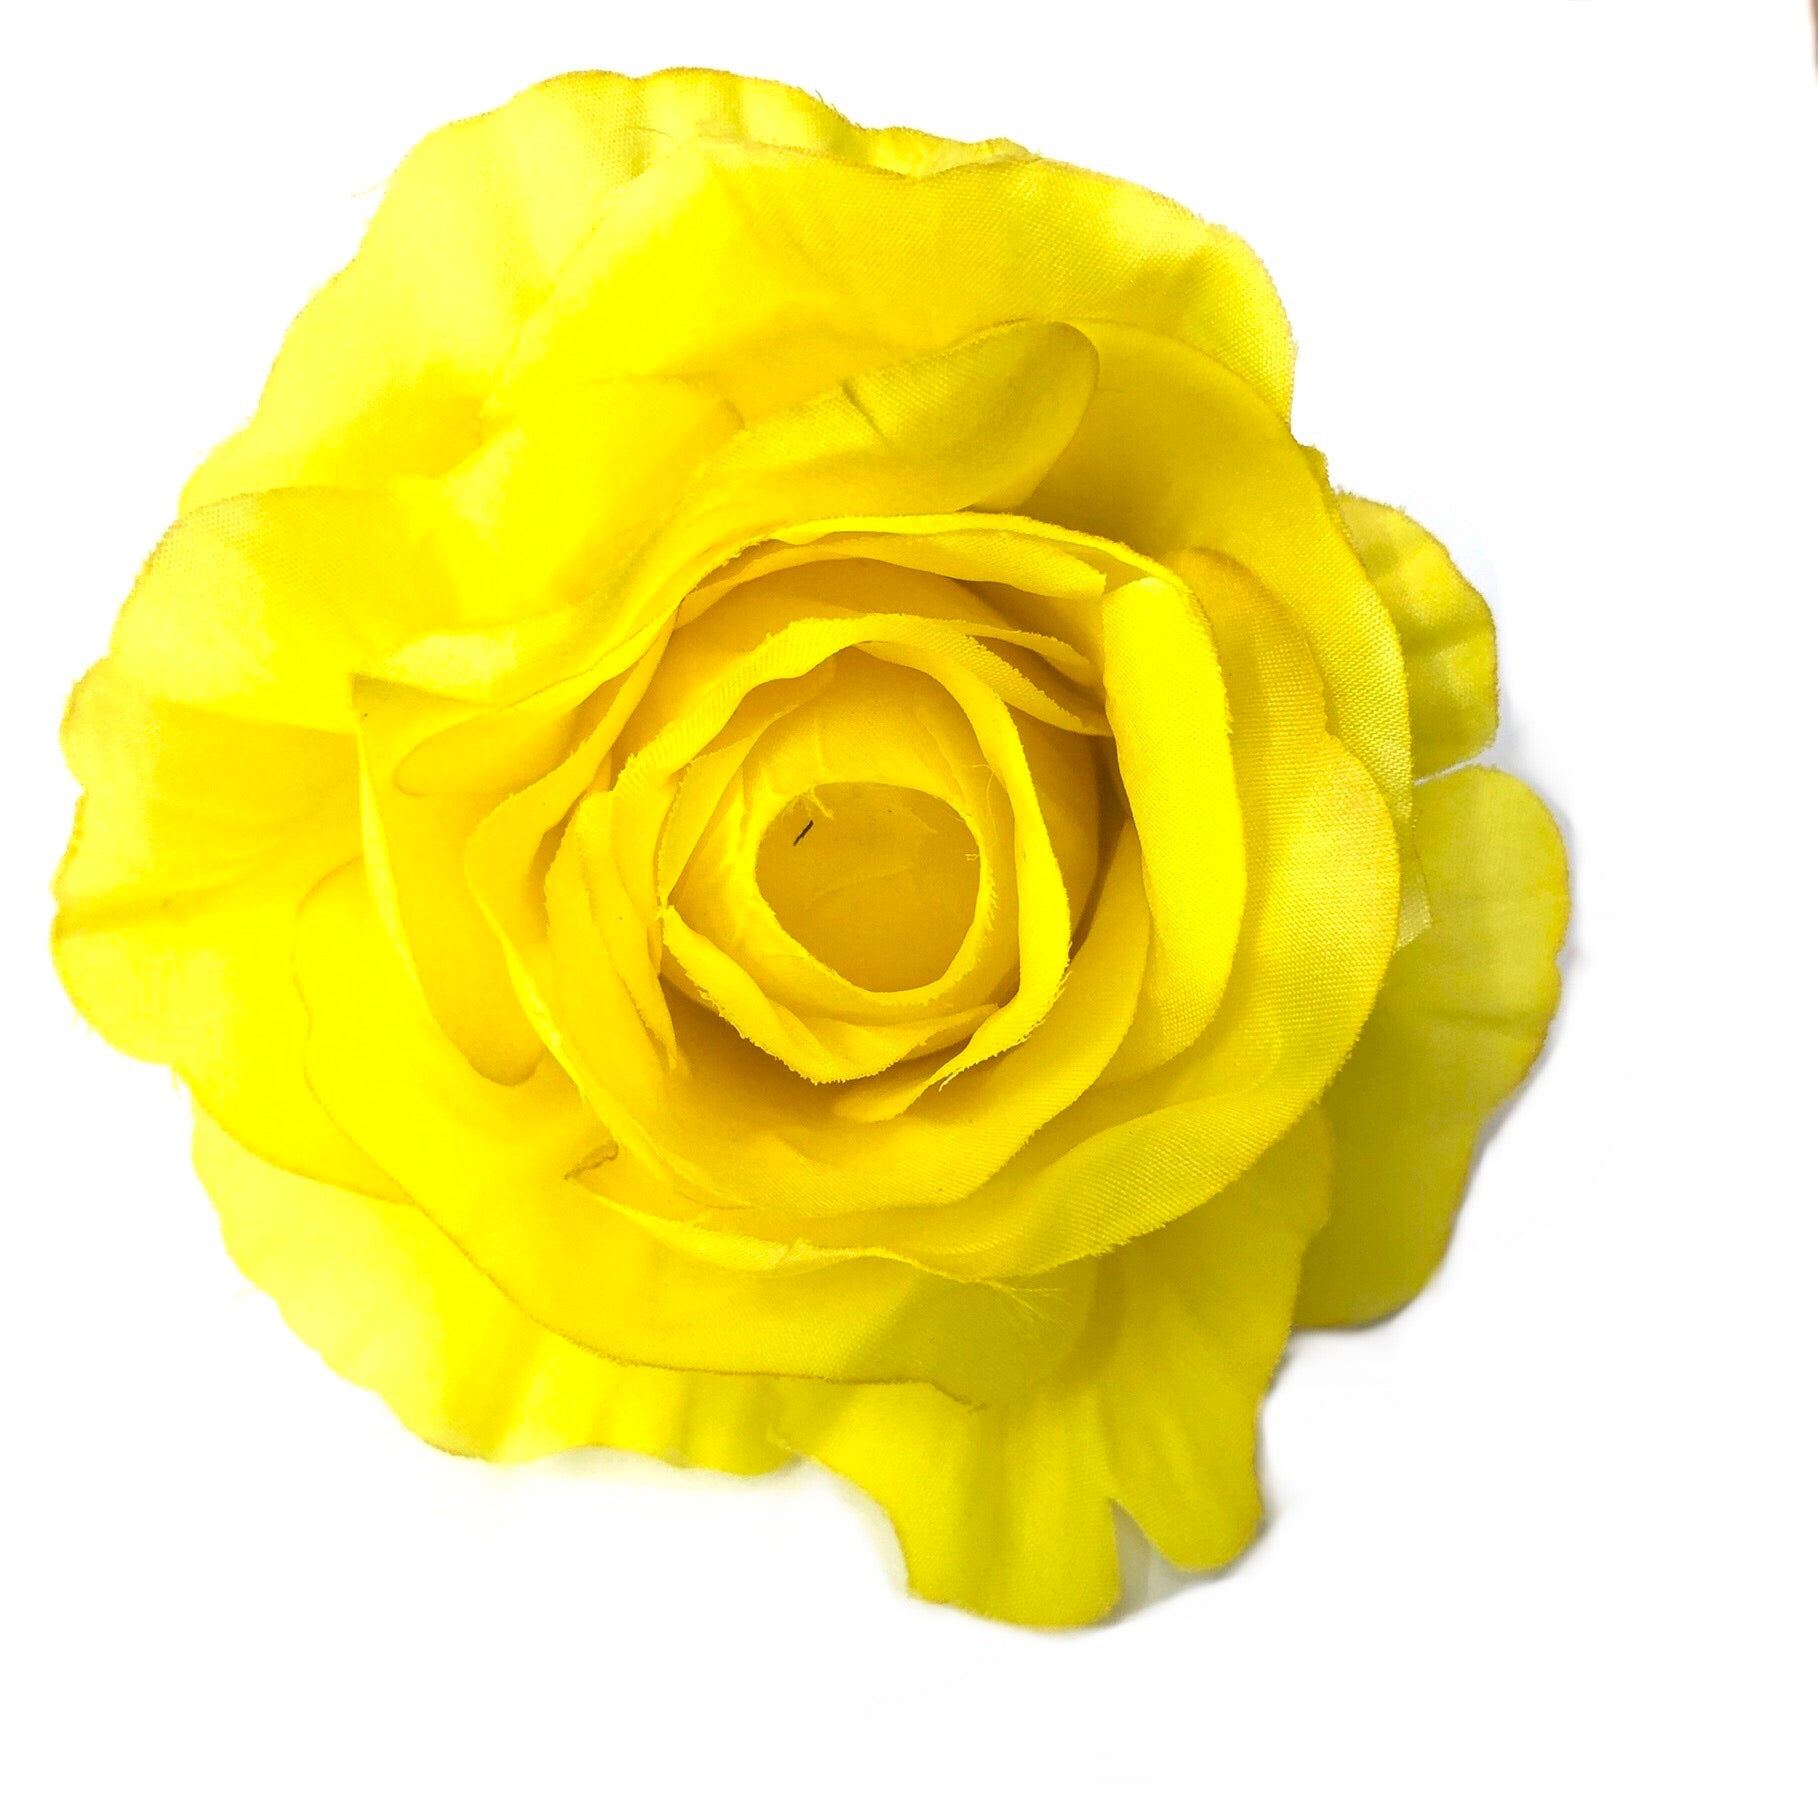 Artificial Silk Flower Head -Yellow Rose Style 118 - 1pc